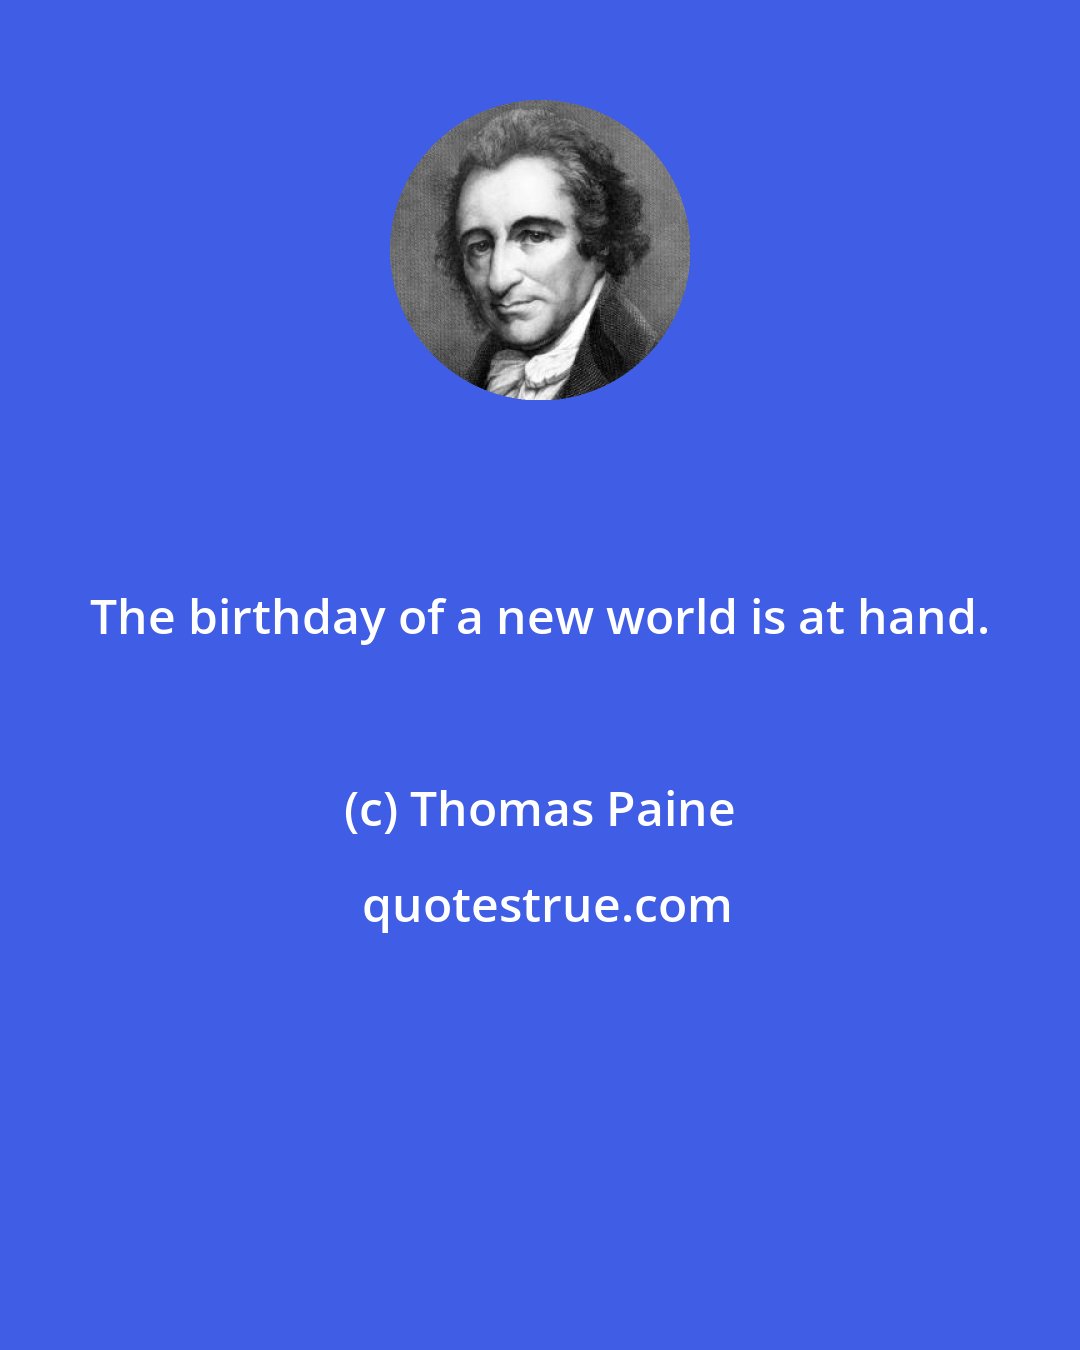 Thomas Paine: The birthday of a new world is at hand.